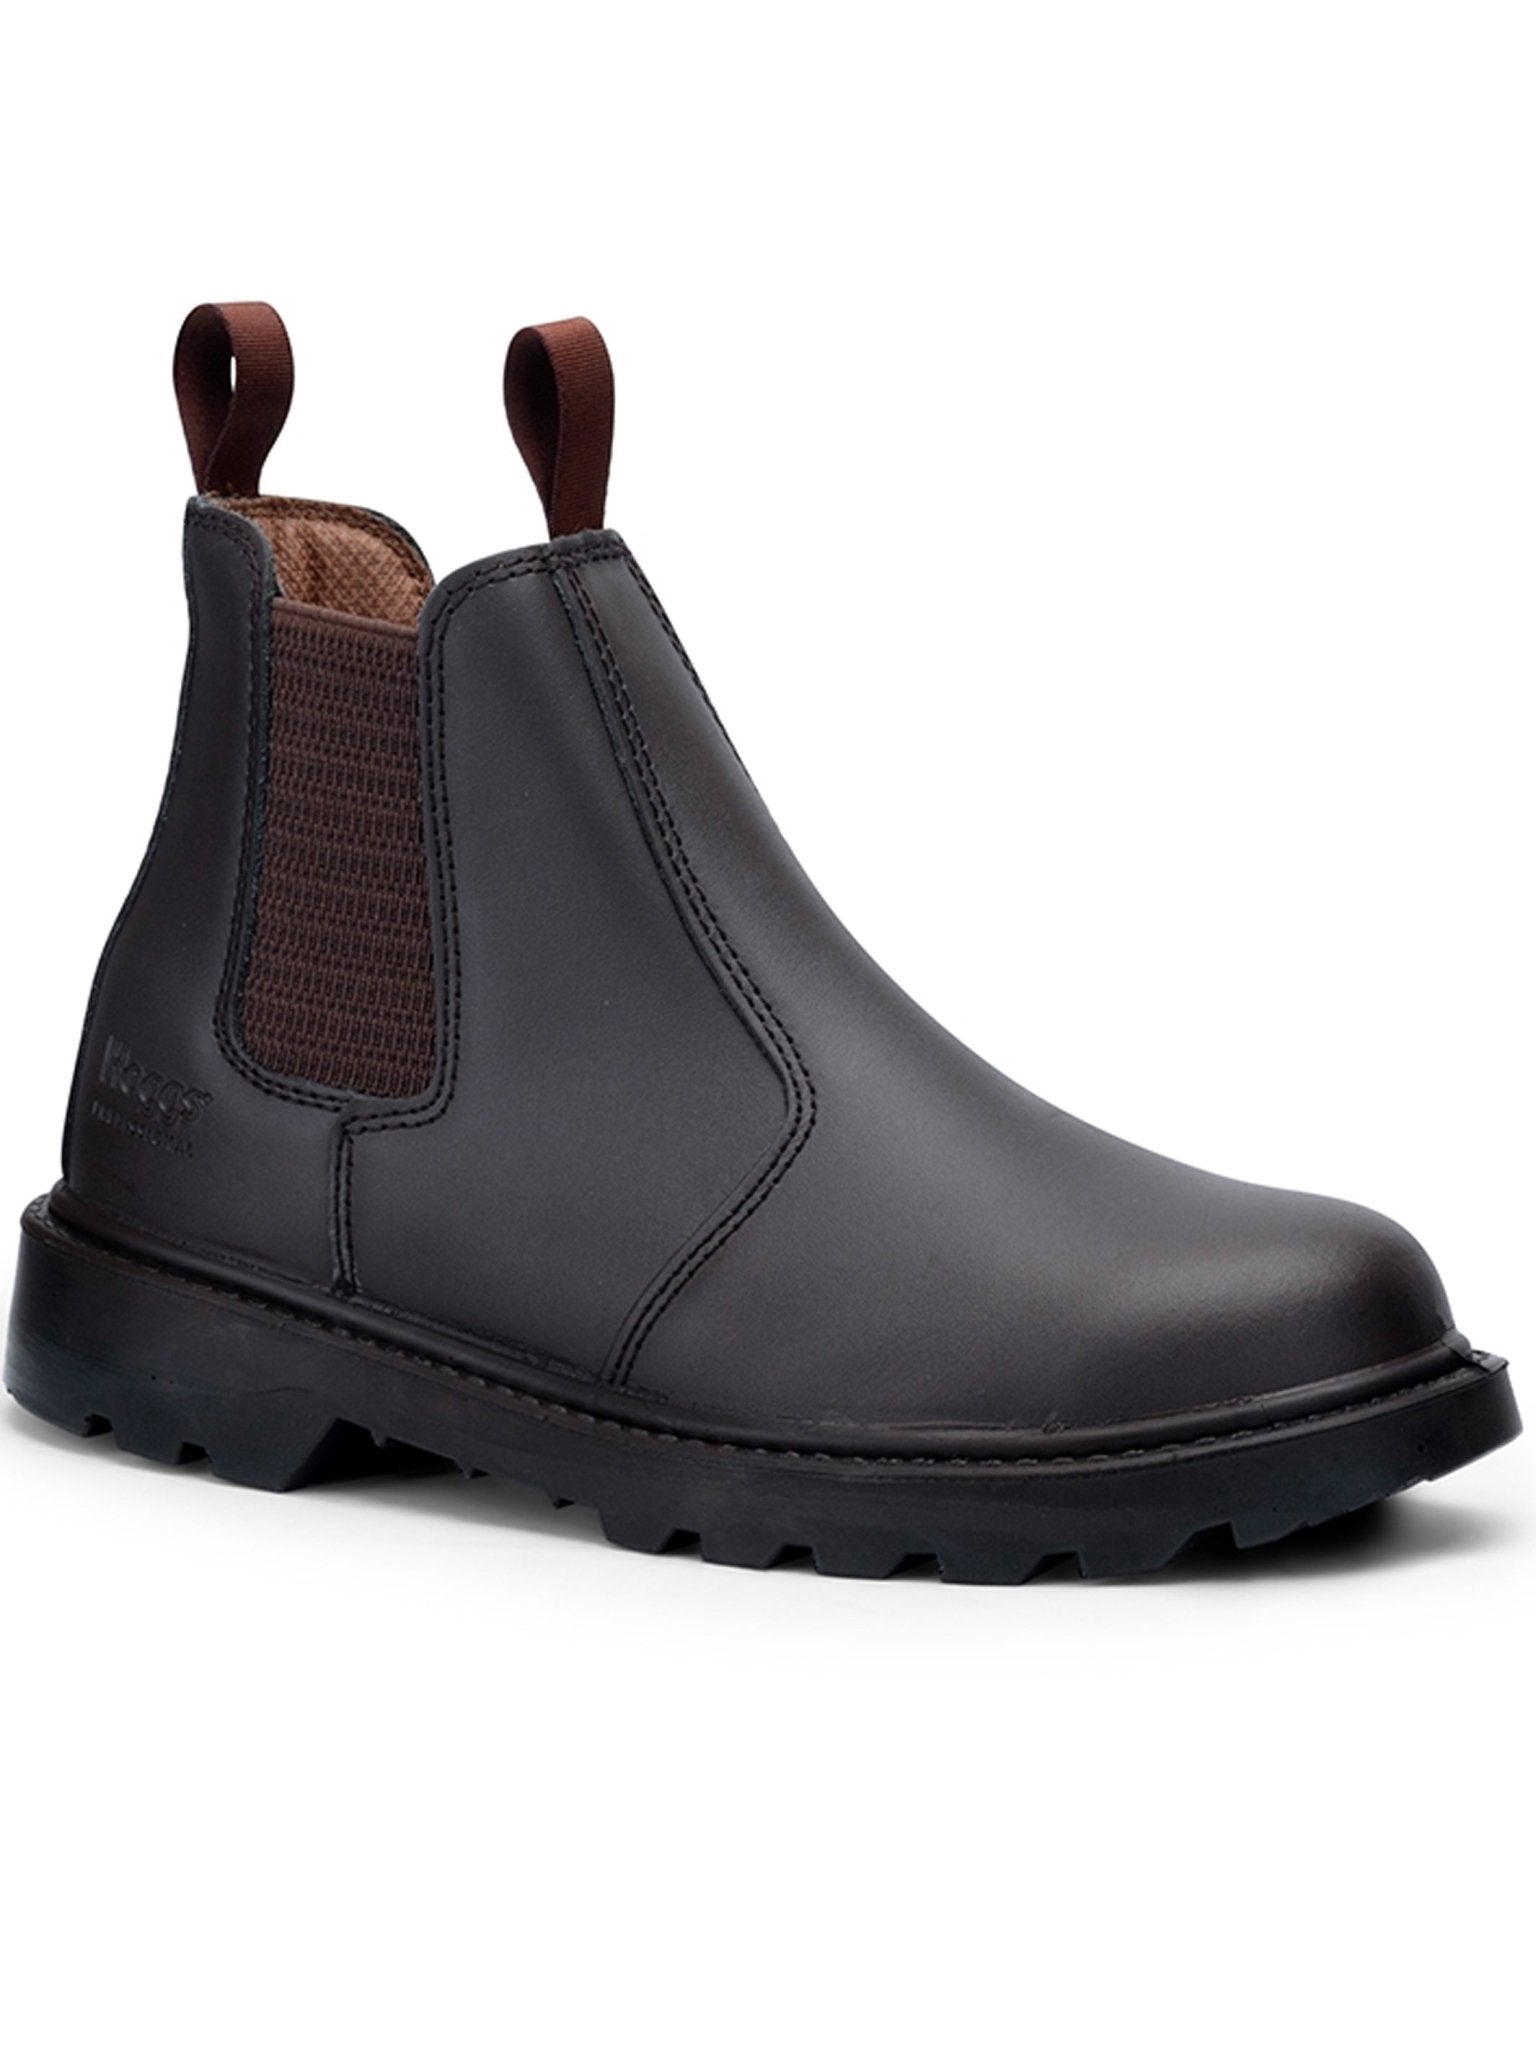 Hoggs of Fife Hoggs of Fife - Safety Steel Toe Dealer Boot / Safety Chelsea boot Steel Toe boots Classic D2 / D3 Safety Footwear